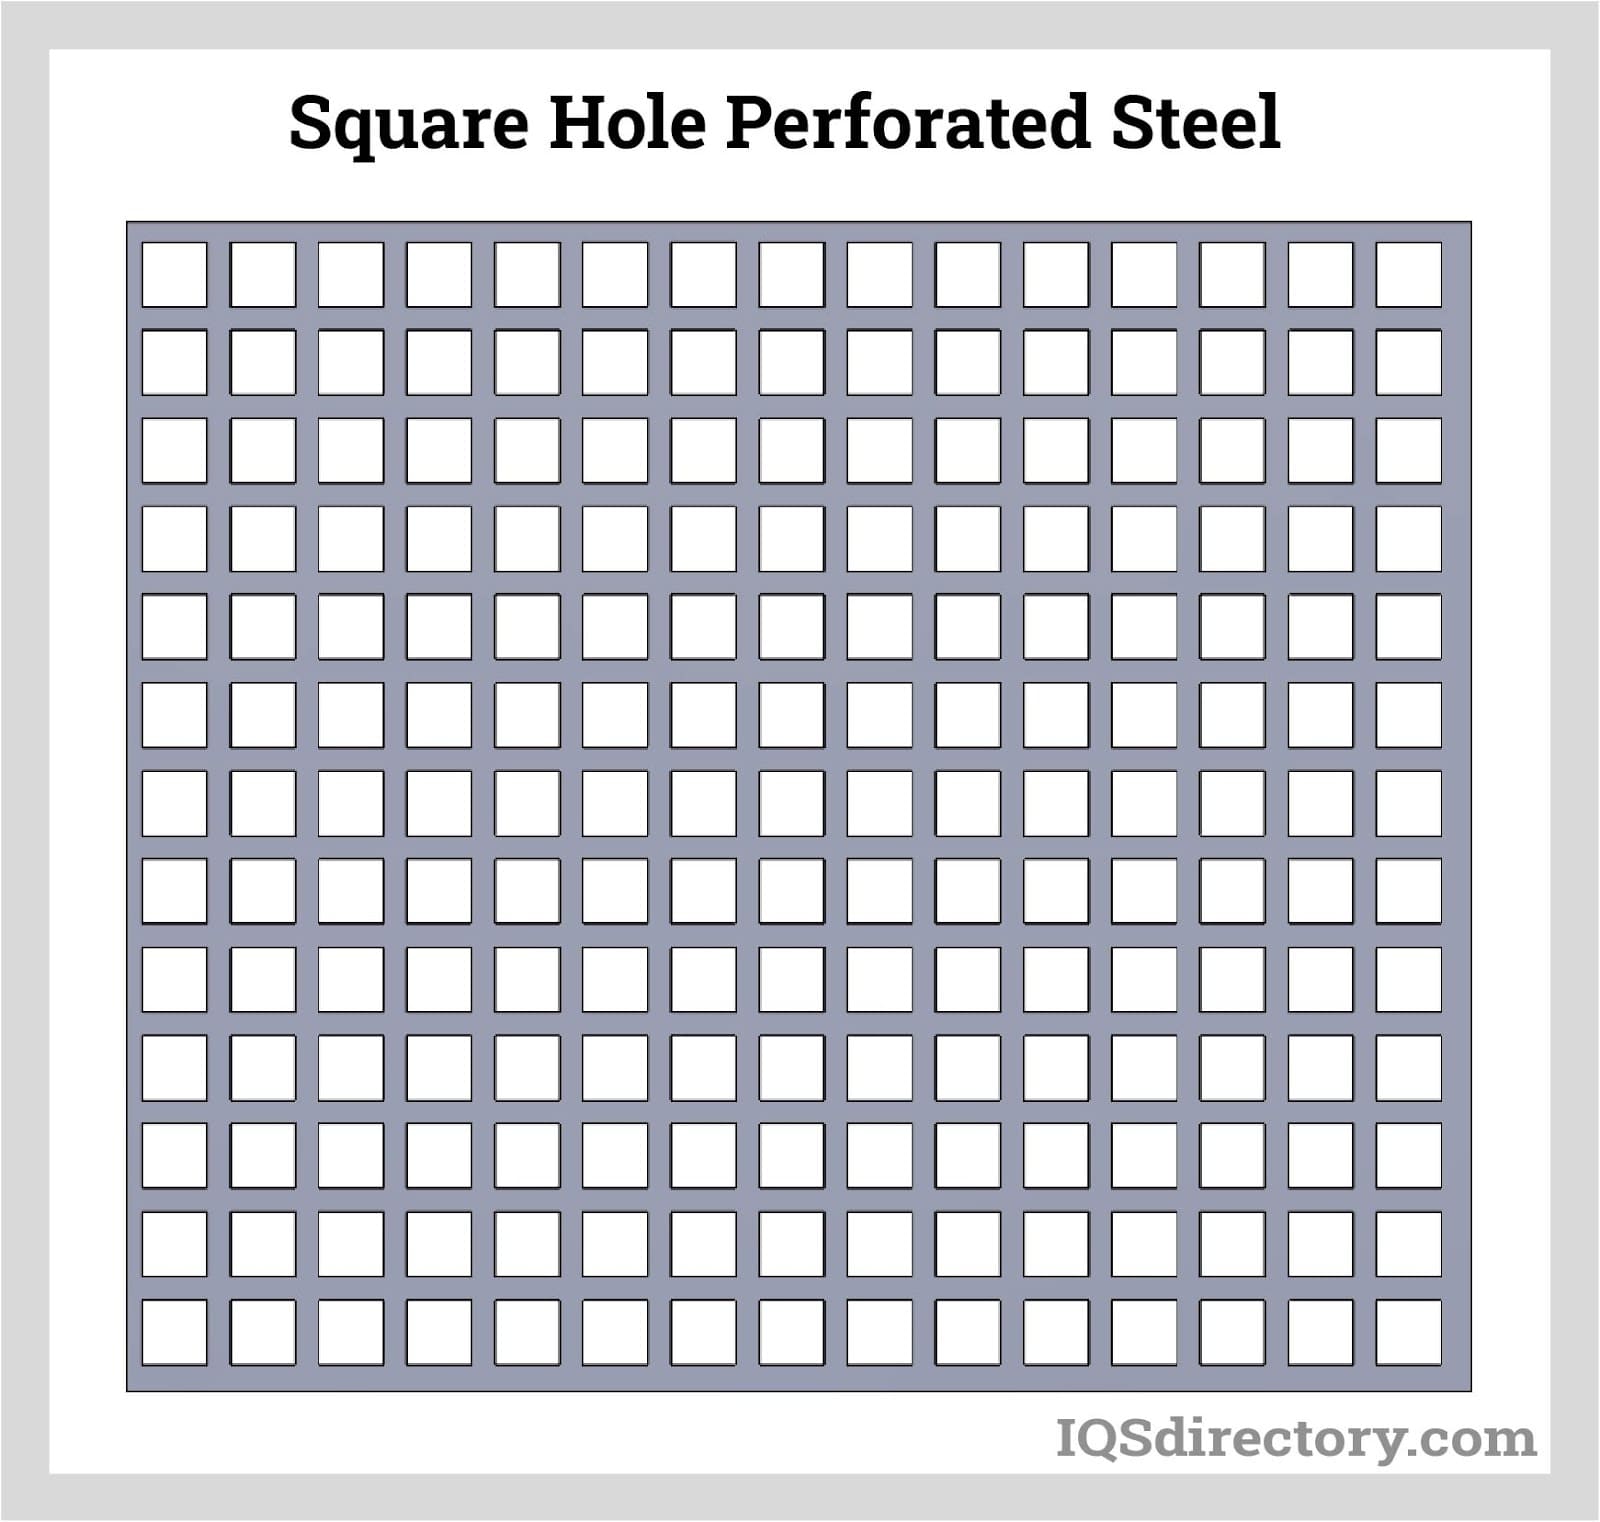 Square Hole Perforated Steel